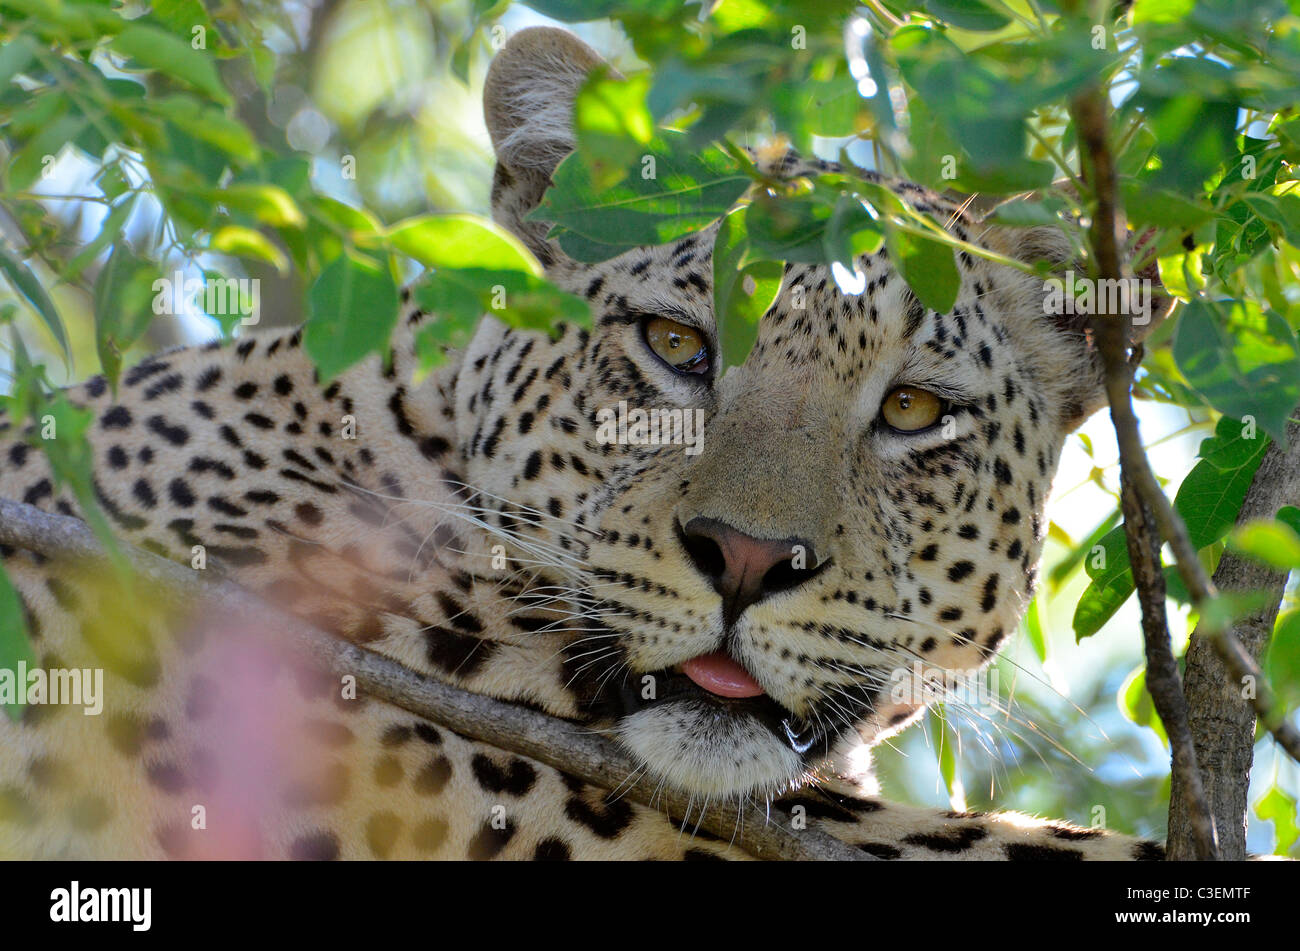 Affordable superb game viewing in the Kruger National Park, South Africa. Stunning close-up of male leopard lying on branch Stock Photo